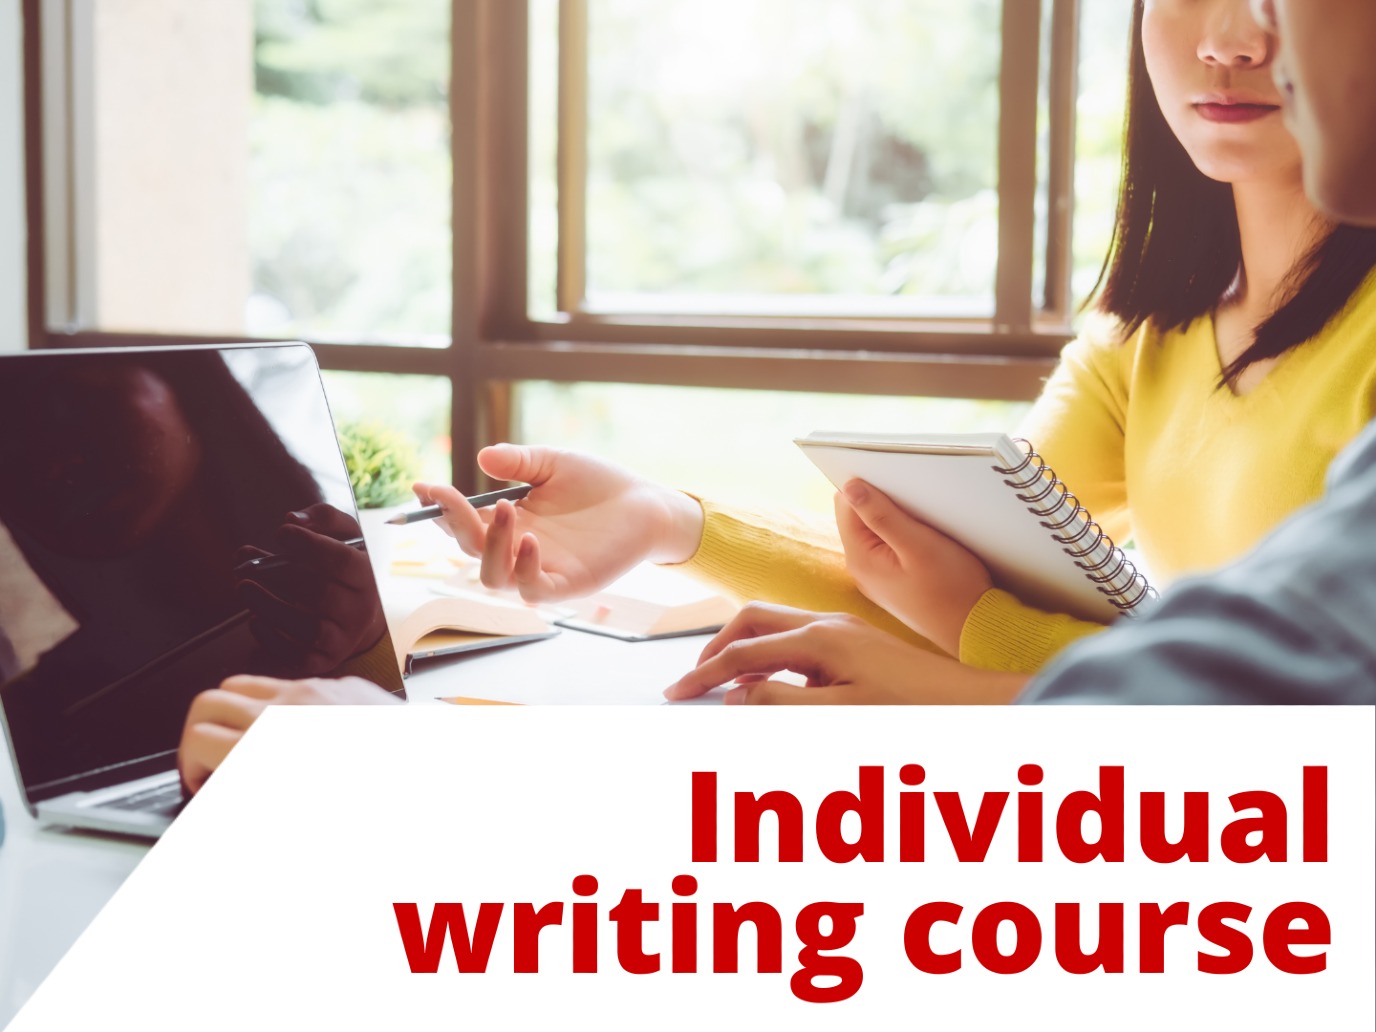 Individual writing course